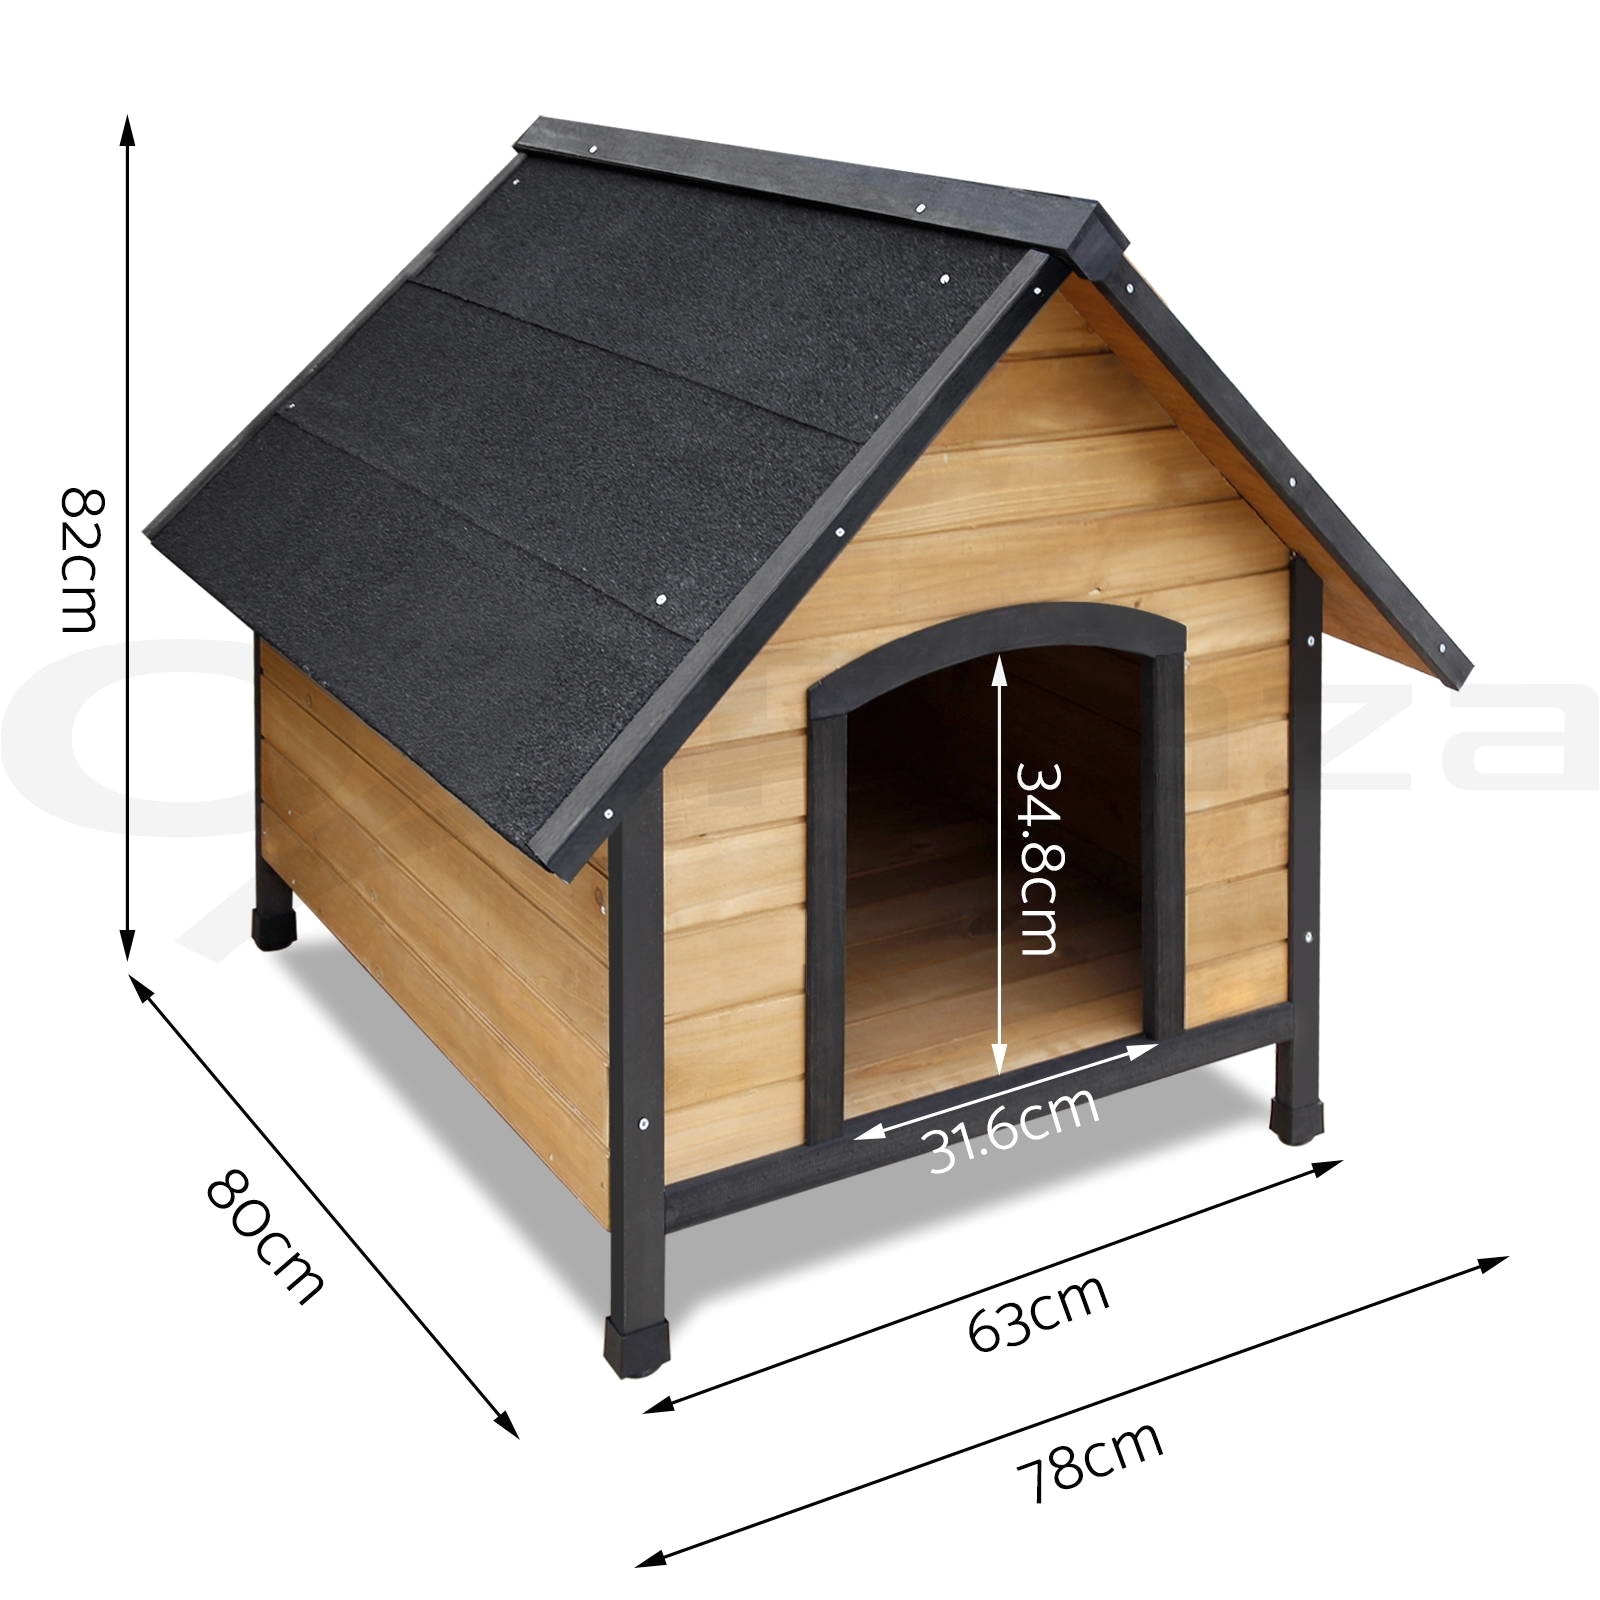 heated dog house plans dog house plans for dogs beautiful the best heated dog beds in